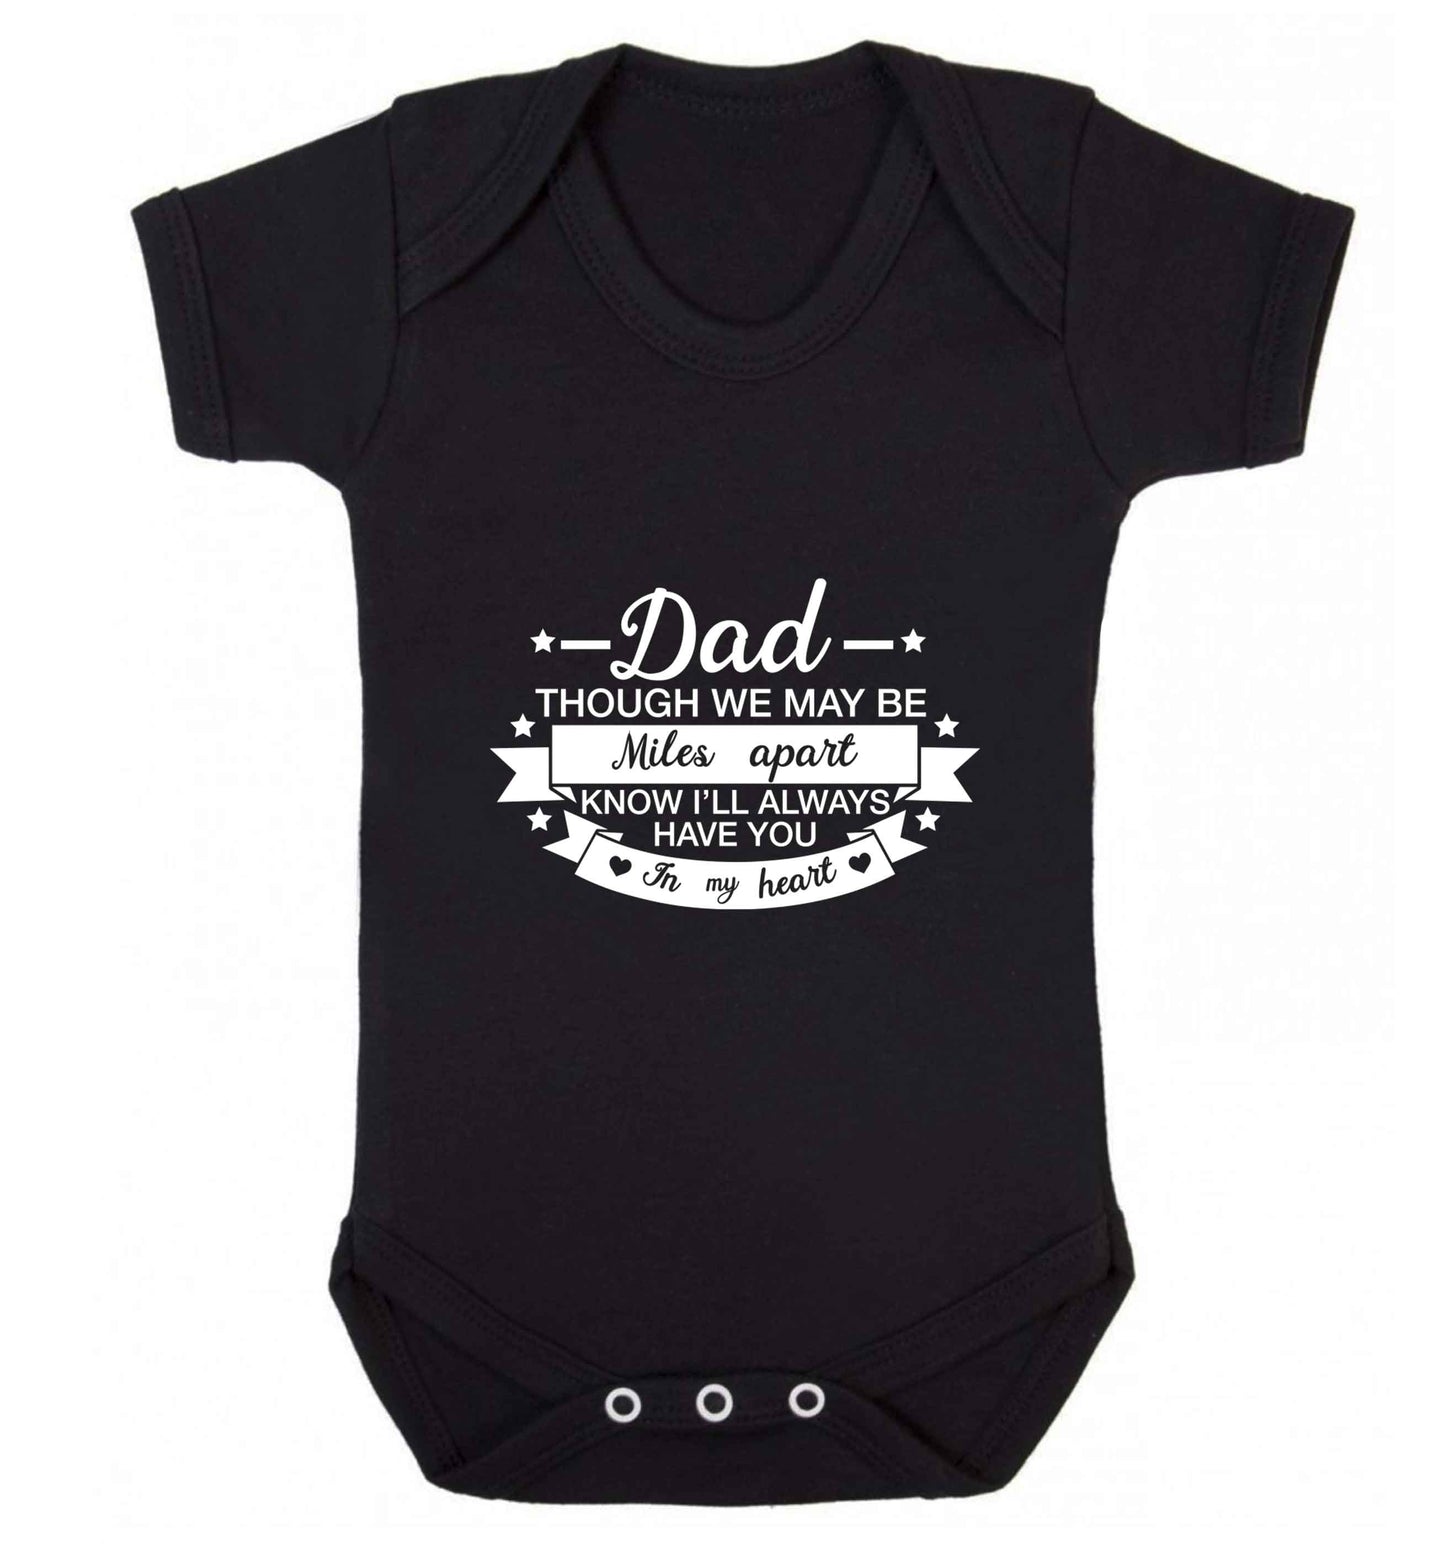 Dad though we are miles apart know I'll always have you in my heart baby vest black 18-24 months